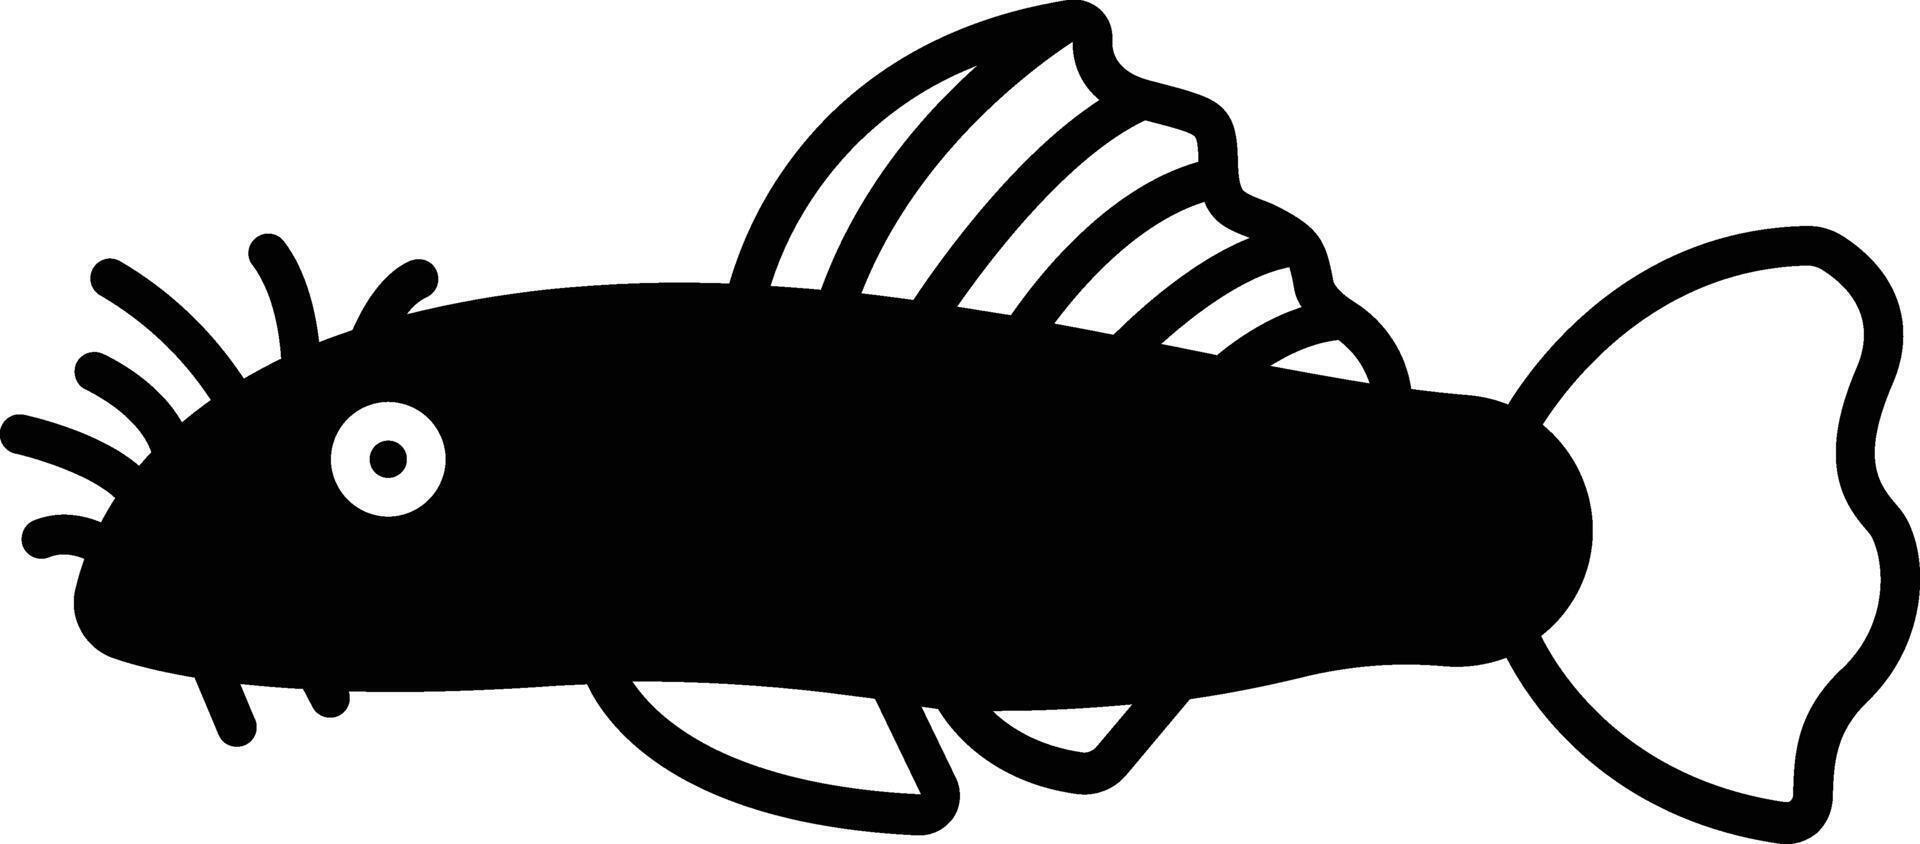 Ancistrus Fish glyph and line vector illustration